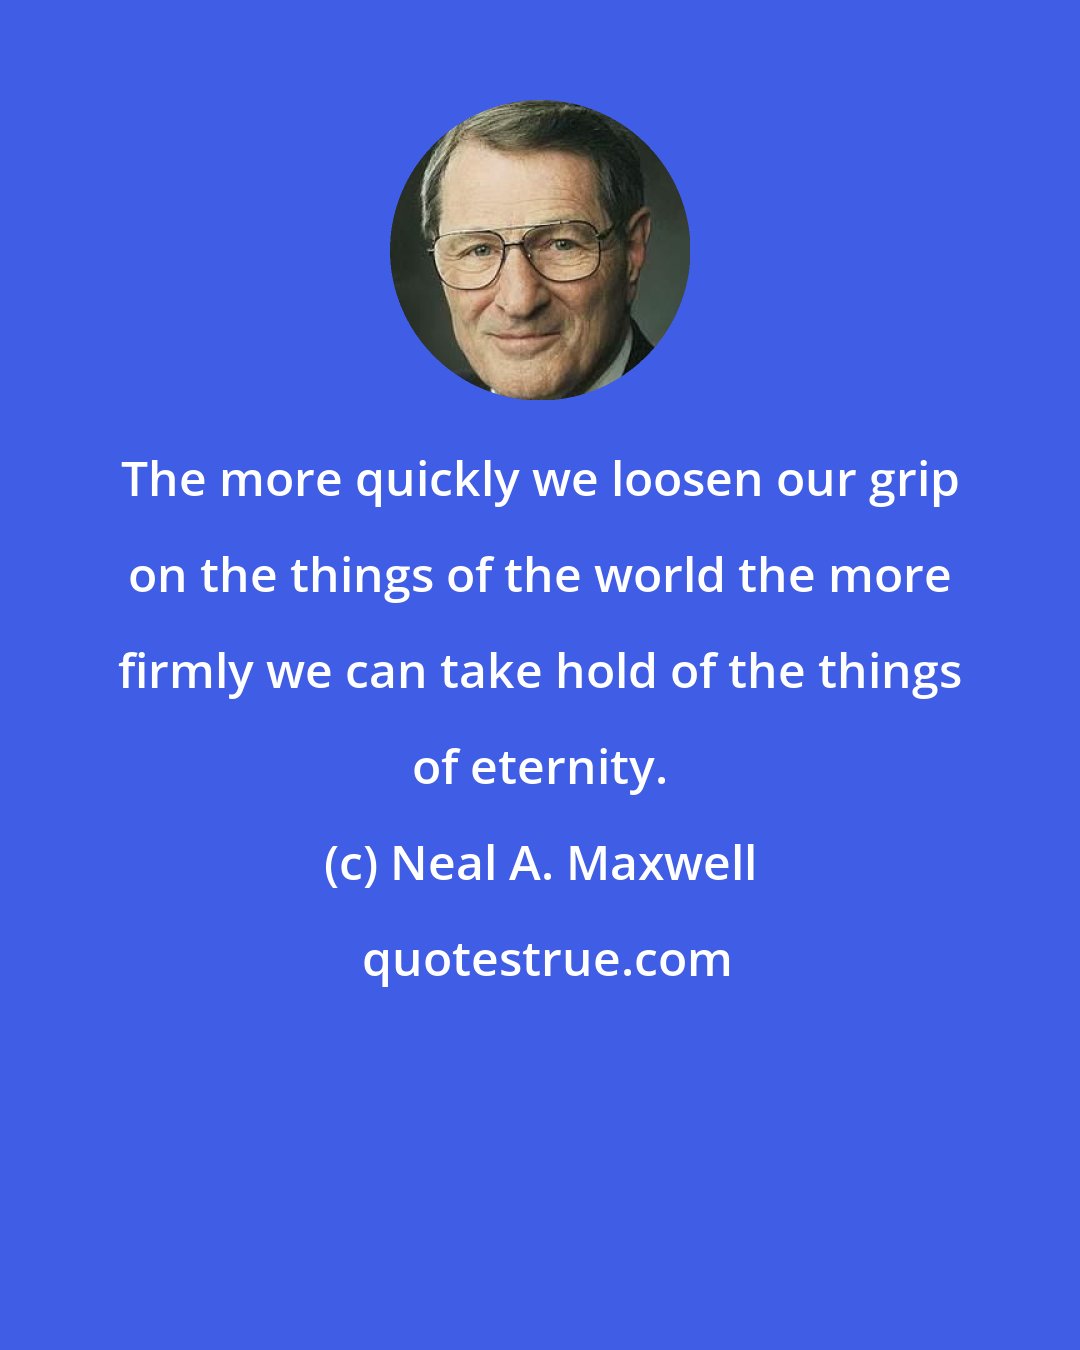 Neal A. Maxwell: The more quickly we loosen our grip on the things of the world the more firmly we can take hold of the things of eternity.